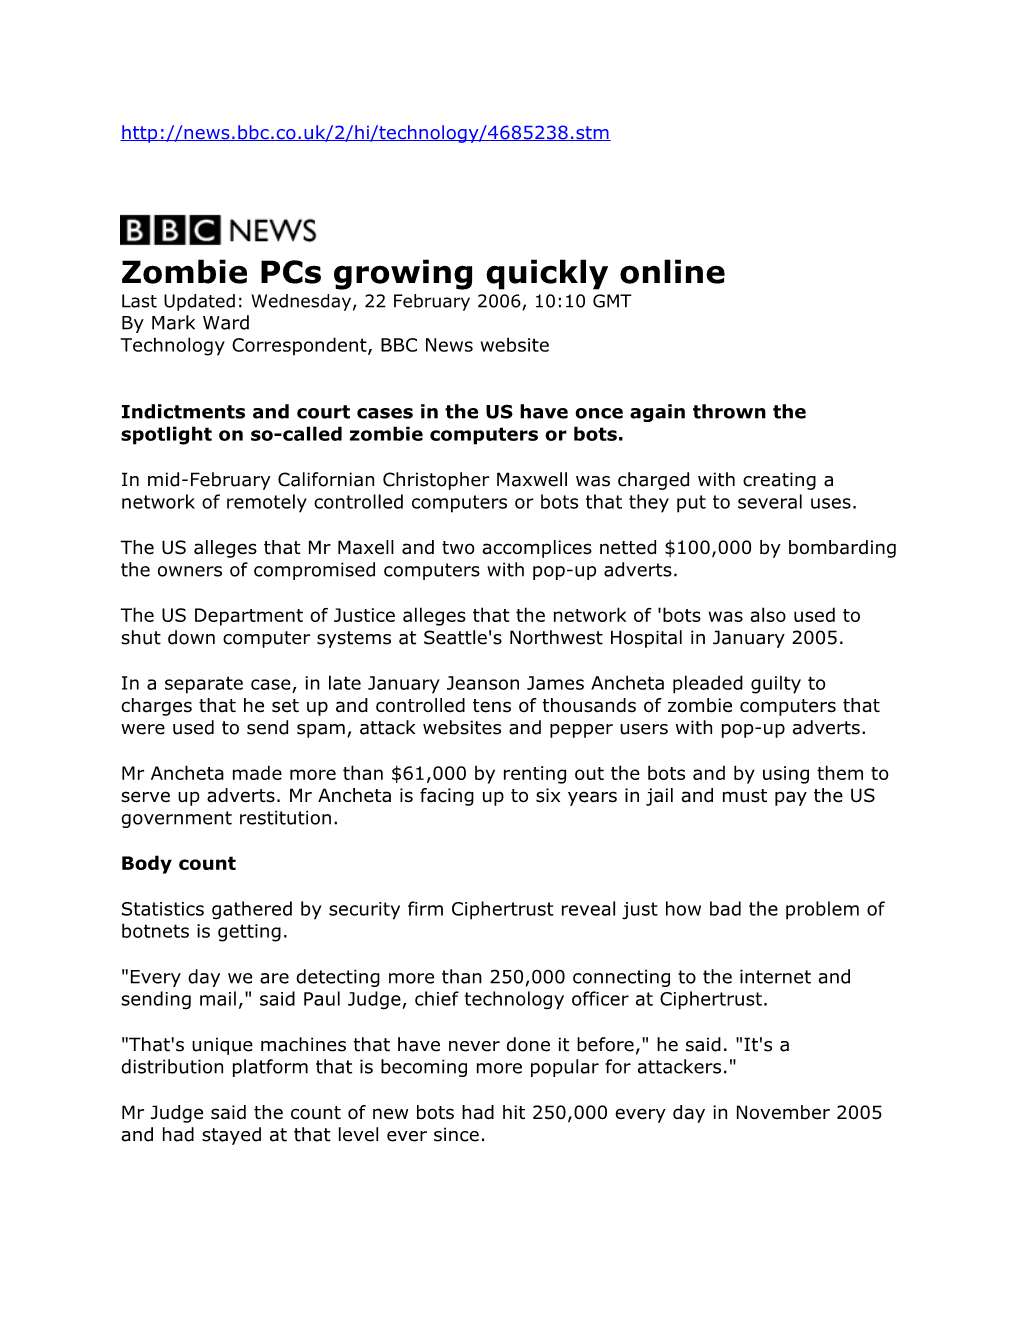 Zombie Pcs Growing Quickly Online - BBC News